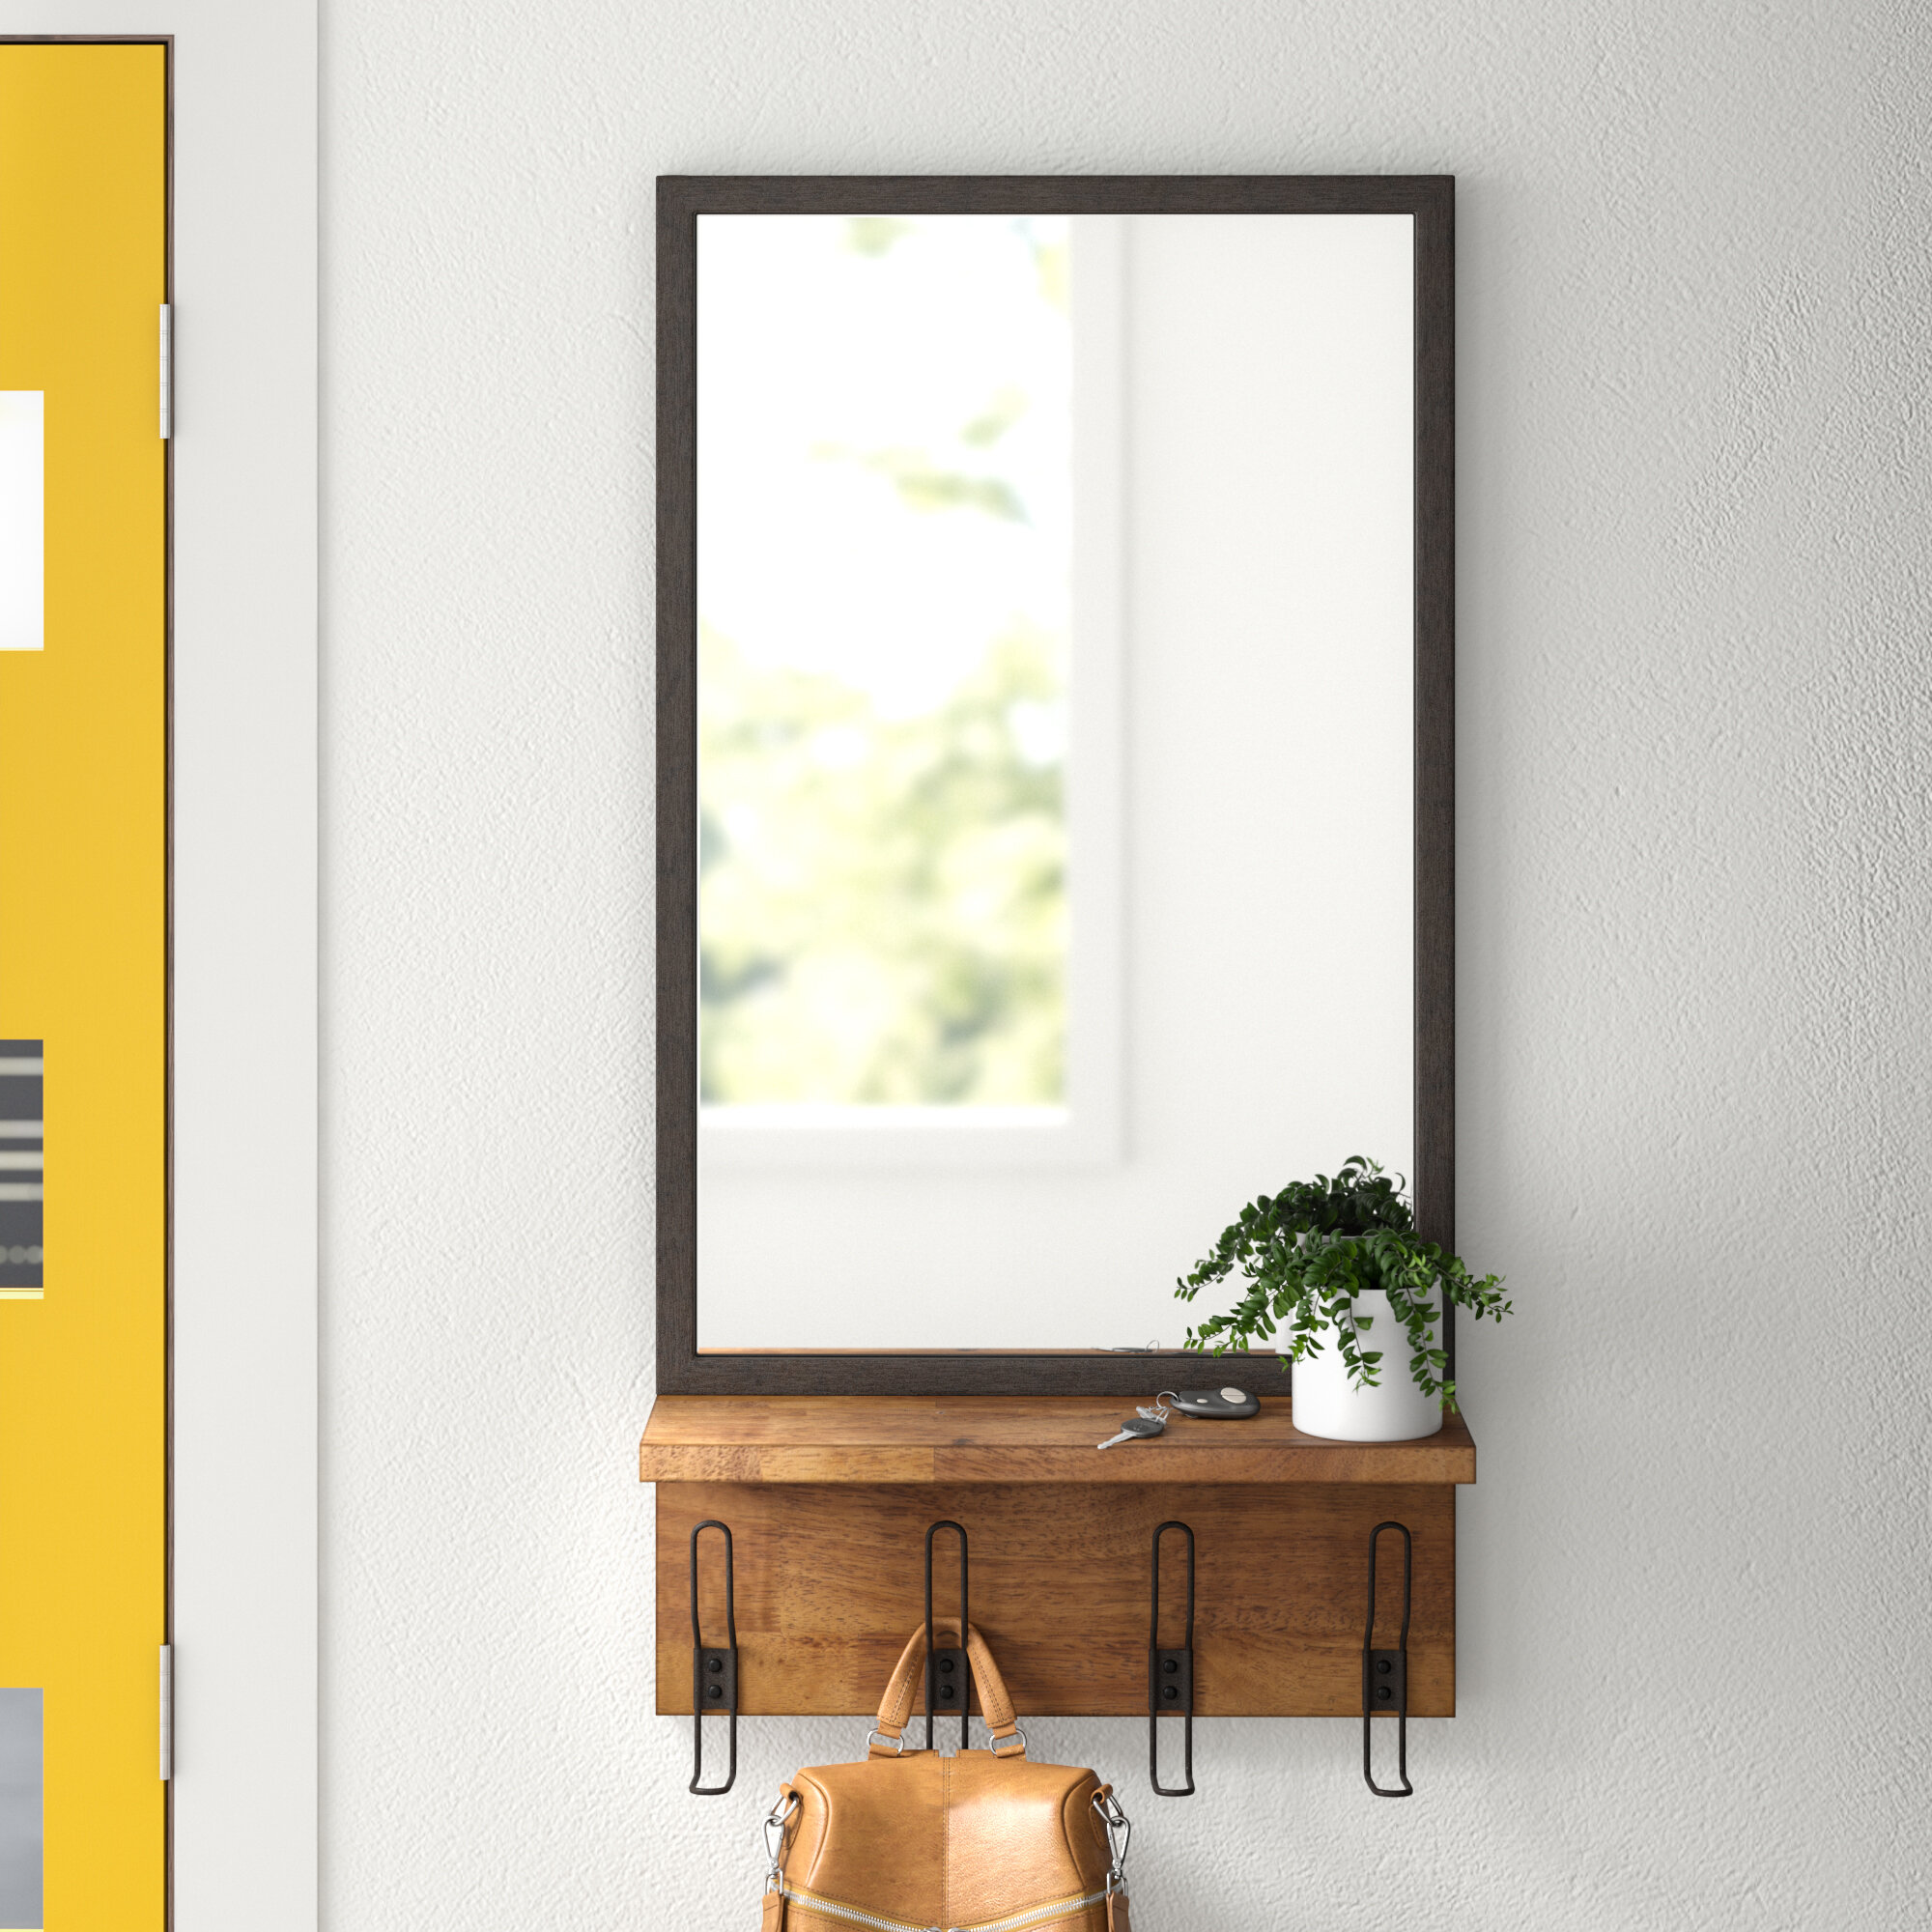 Jacobsen Industrial Accent Mirror With Shelves Reviews Allmodern